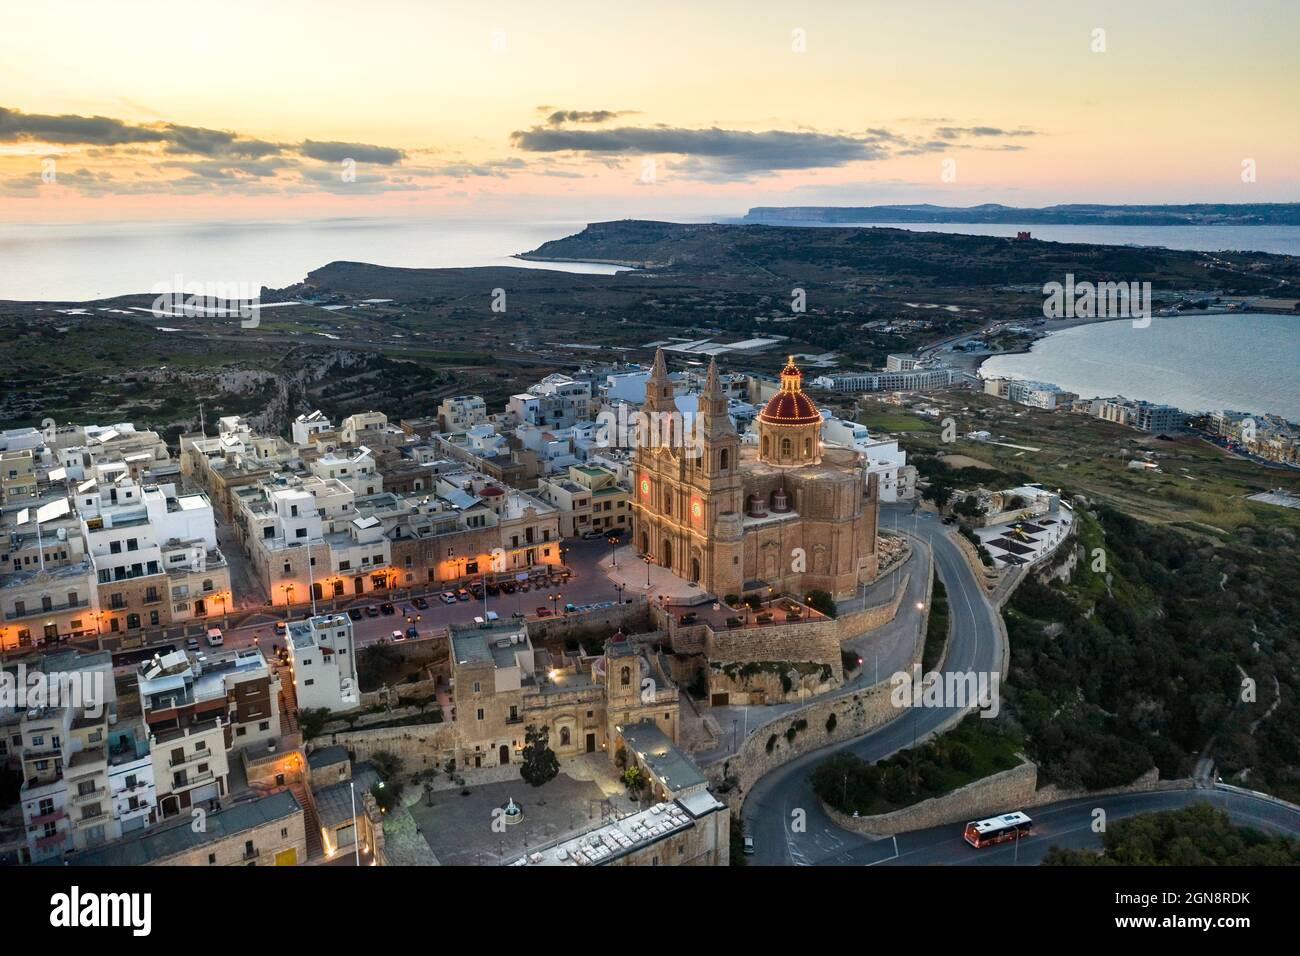 Malta, Northern Region, Mellieha, Aerial view of coastal town at dusk with Parish Church of Nativity of Virgin Mary in center Stock Photo